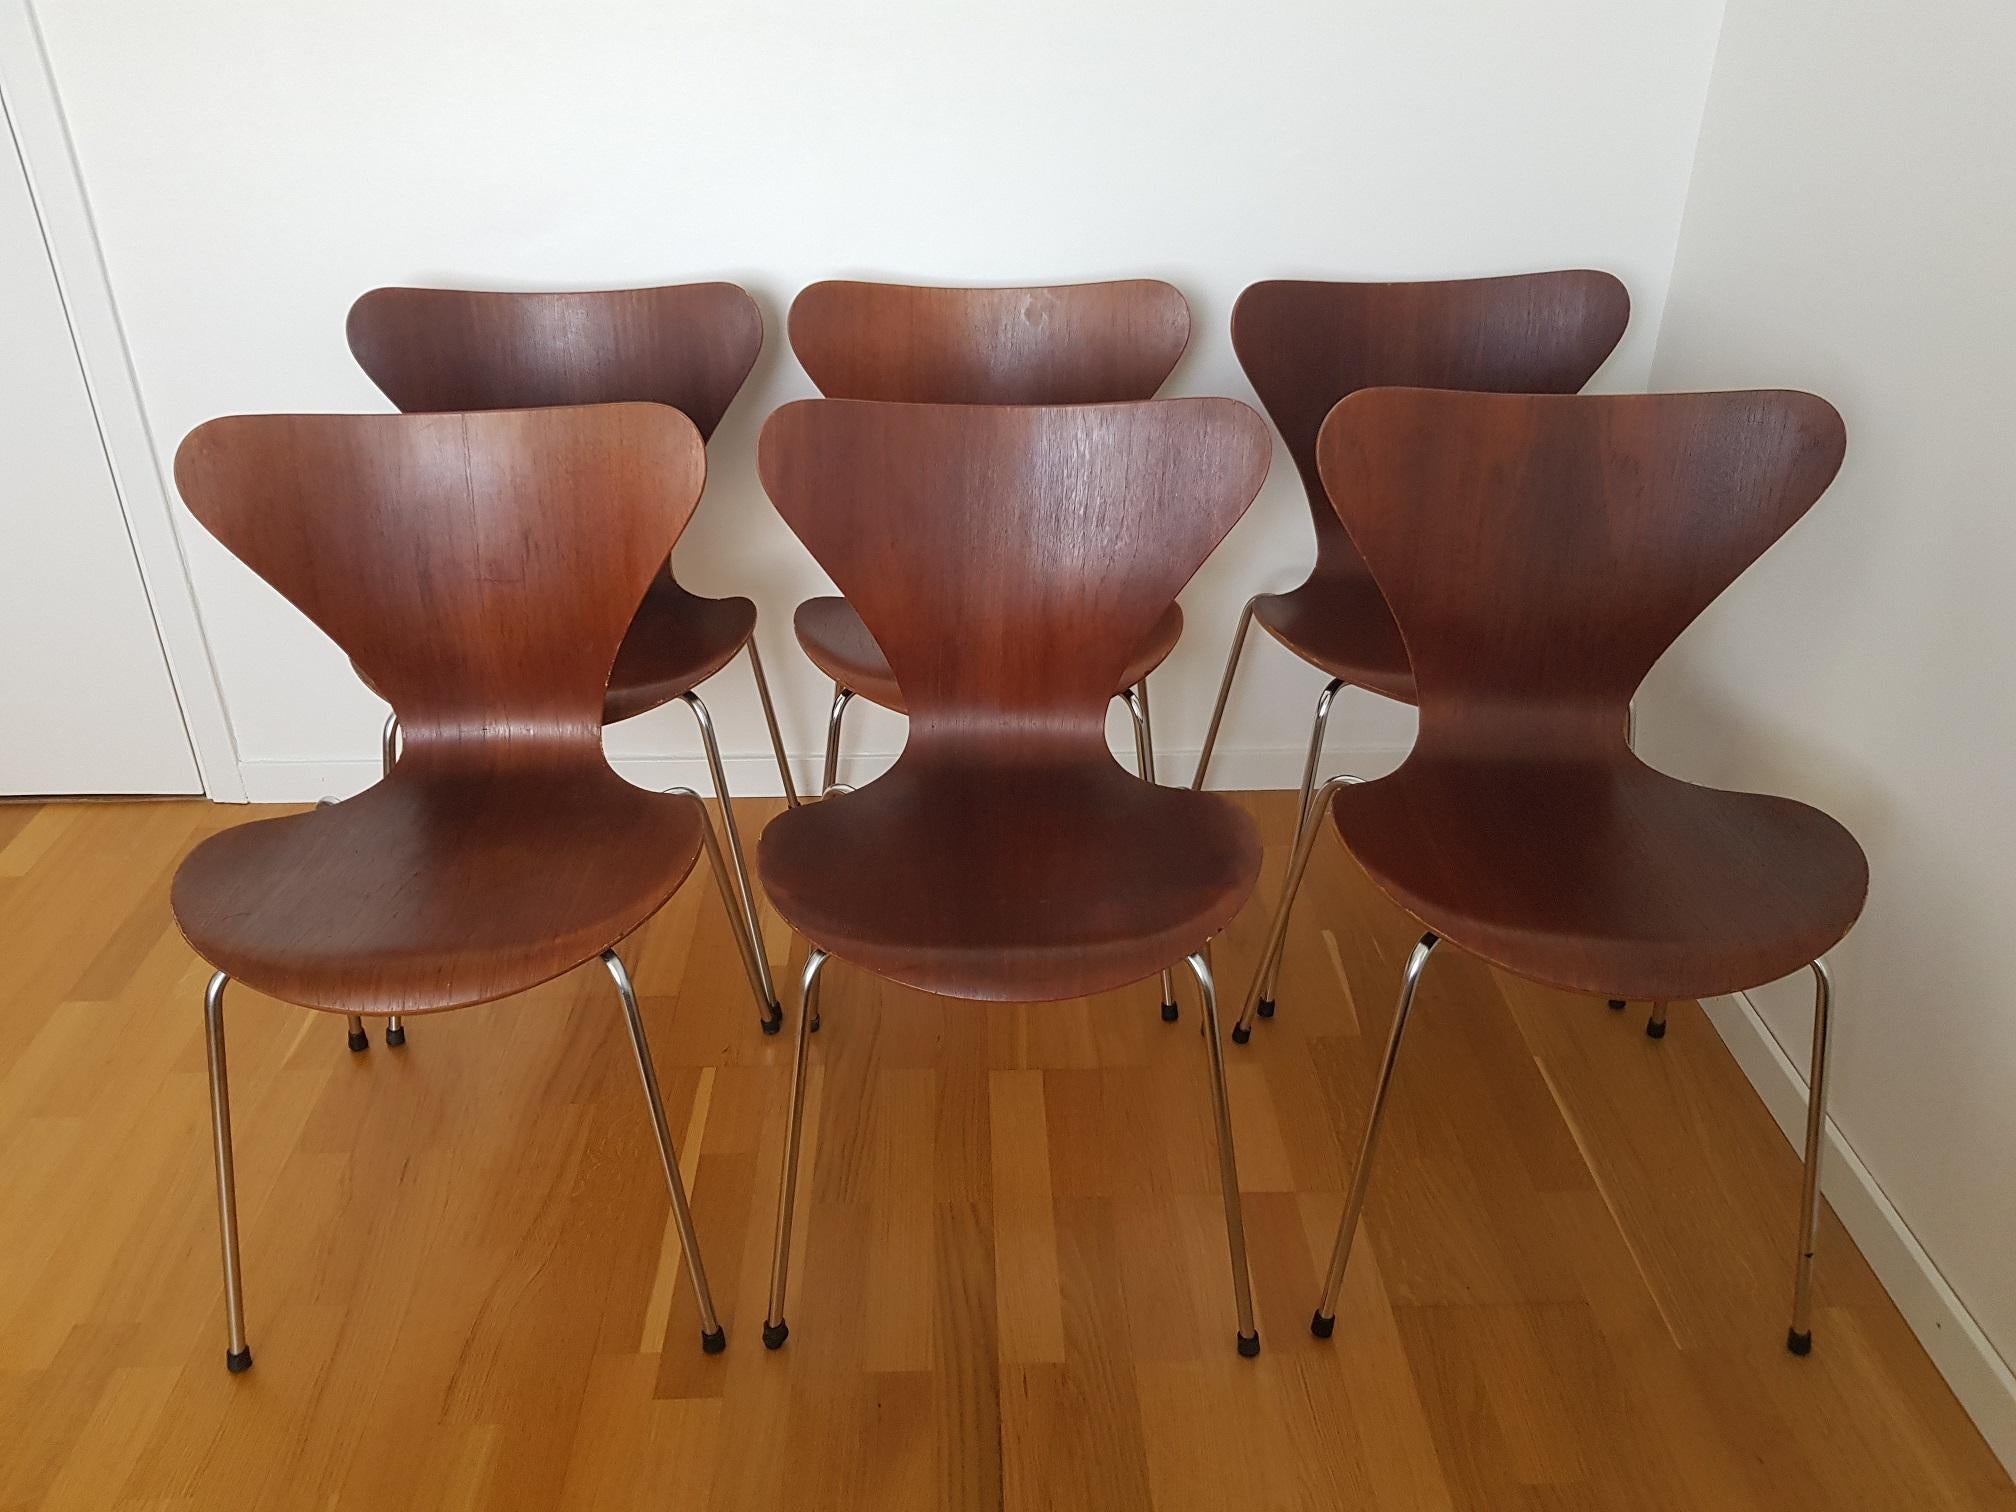 6 vintage series 7 chairs in teak. Model 3107. Produced in the 1960s by Fritz Hansen. The iconic Series 7 chair is probably the most well-known chair in the world of Scandinavian modern design. It is the classical midcentury Scandinavian designer